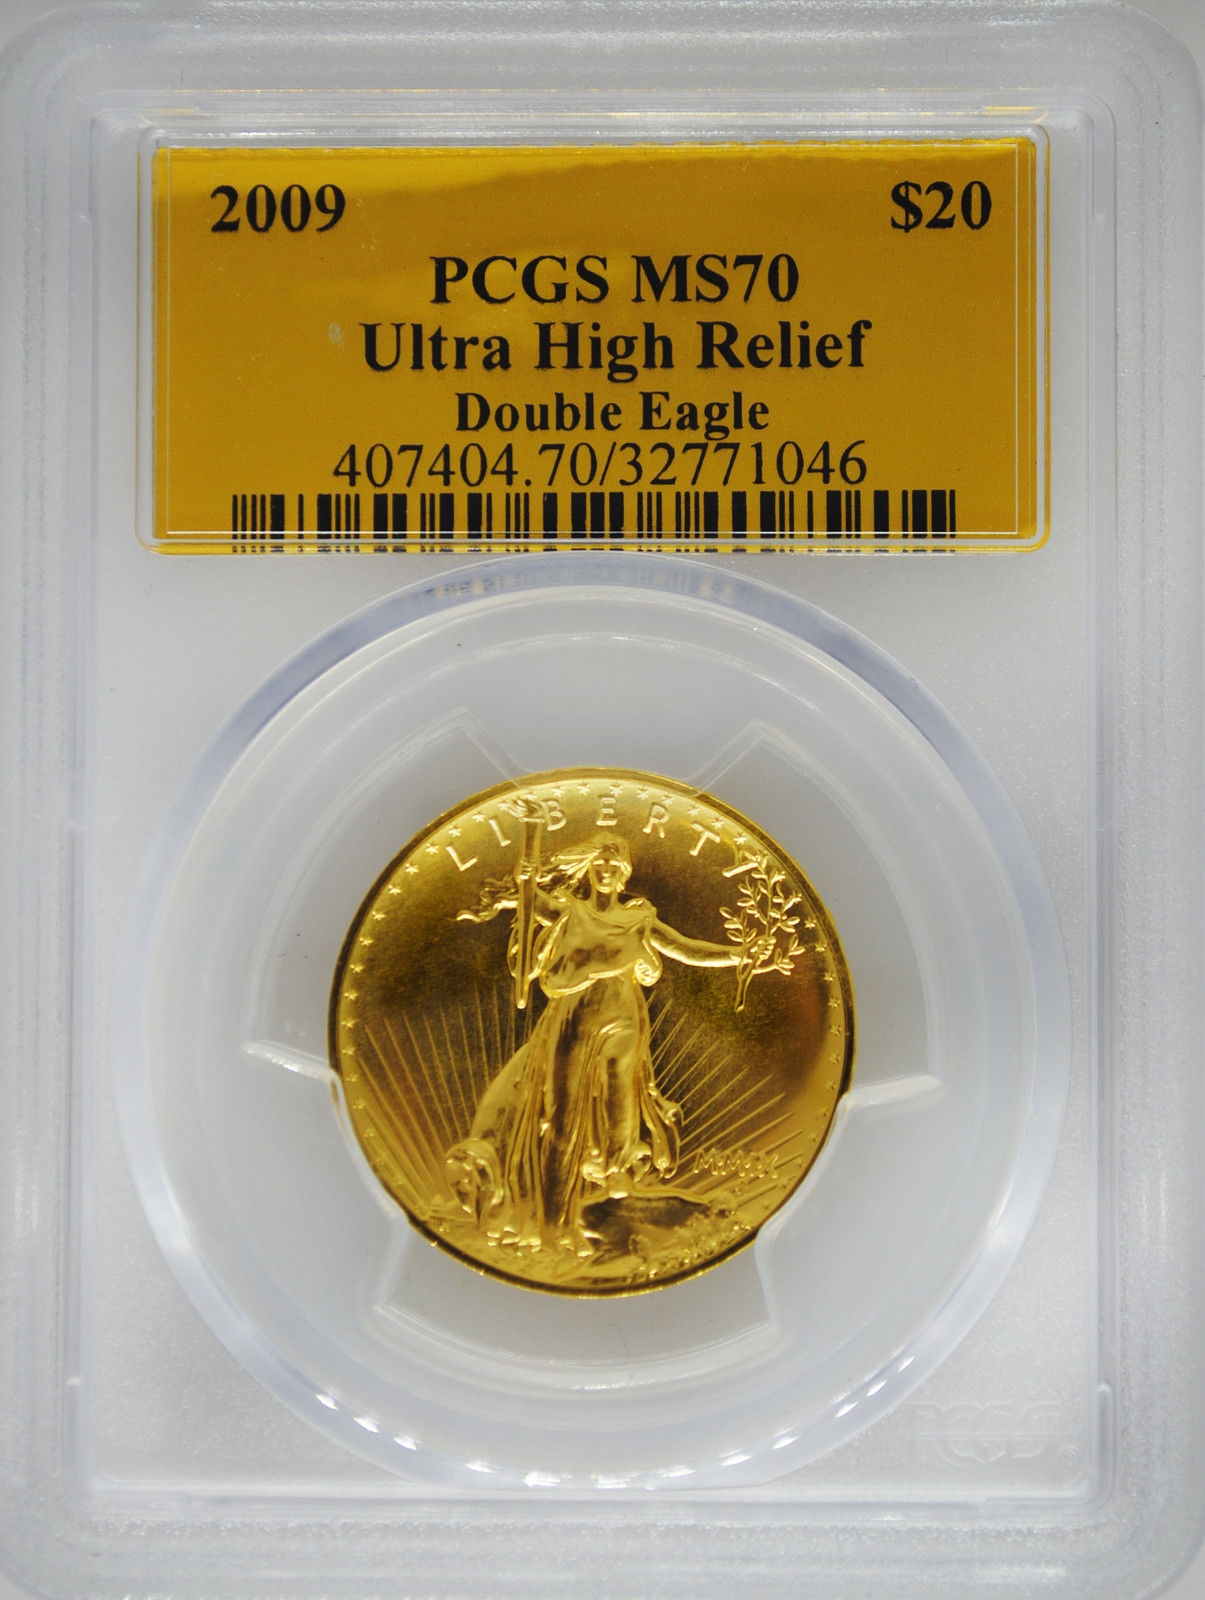 2009 PCGS MS70 Ultra High Relief Double Eagle